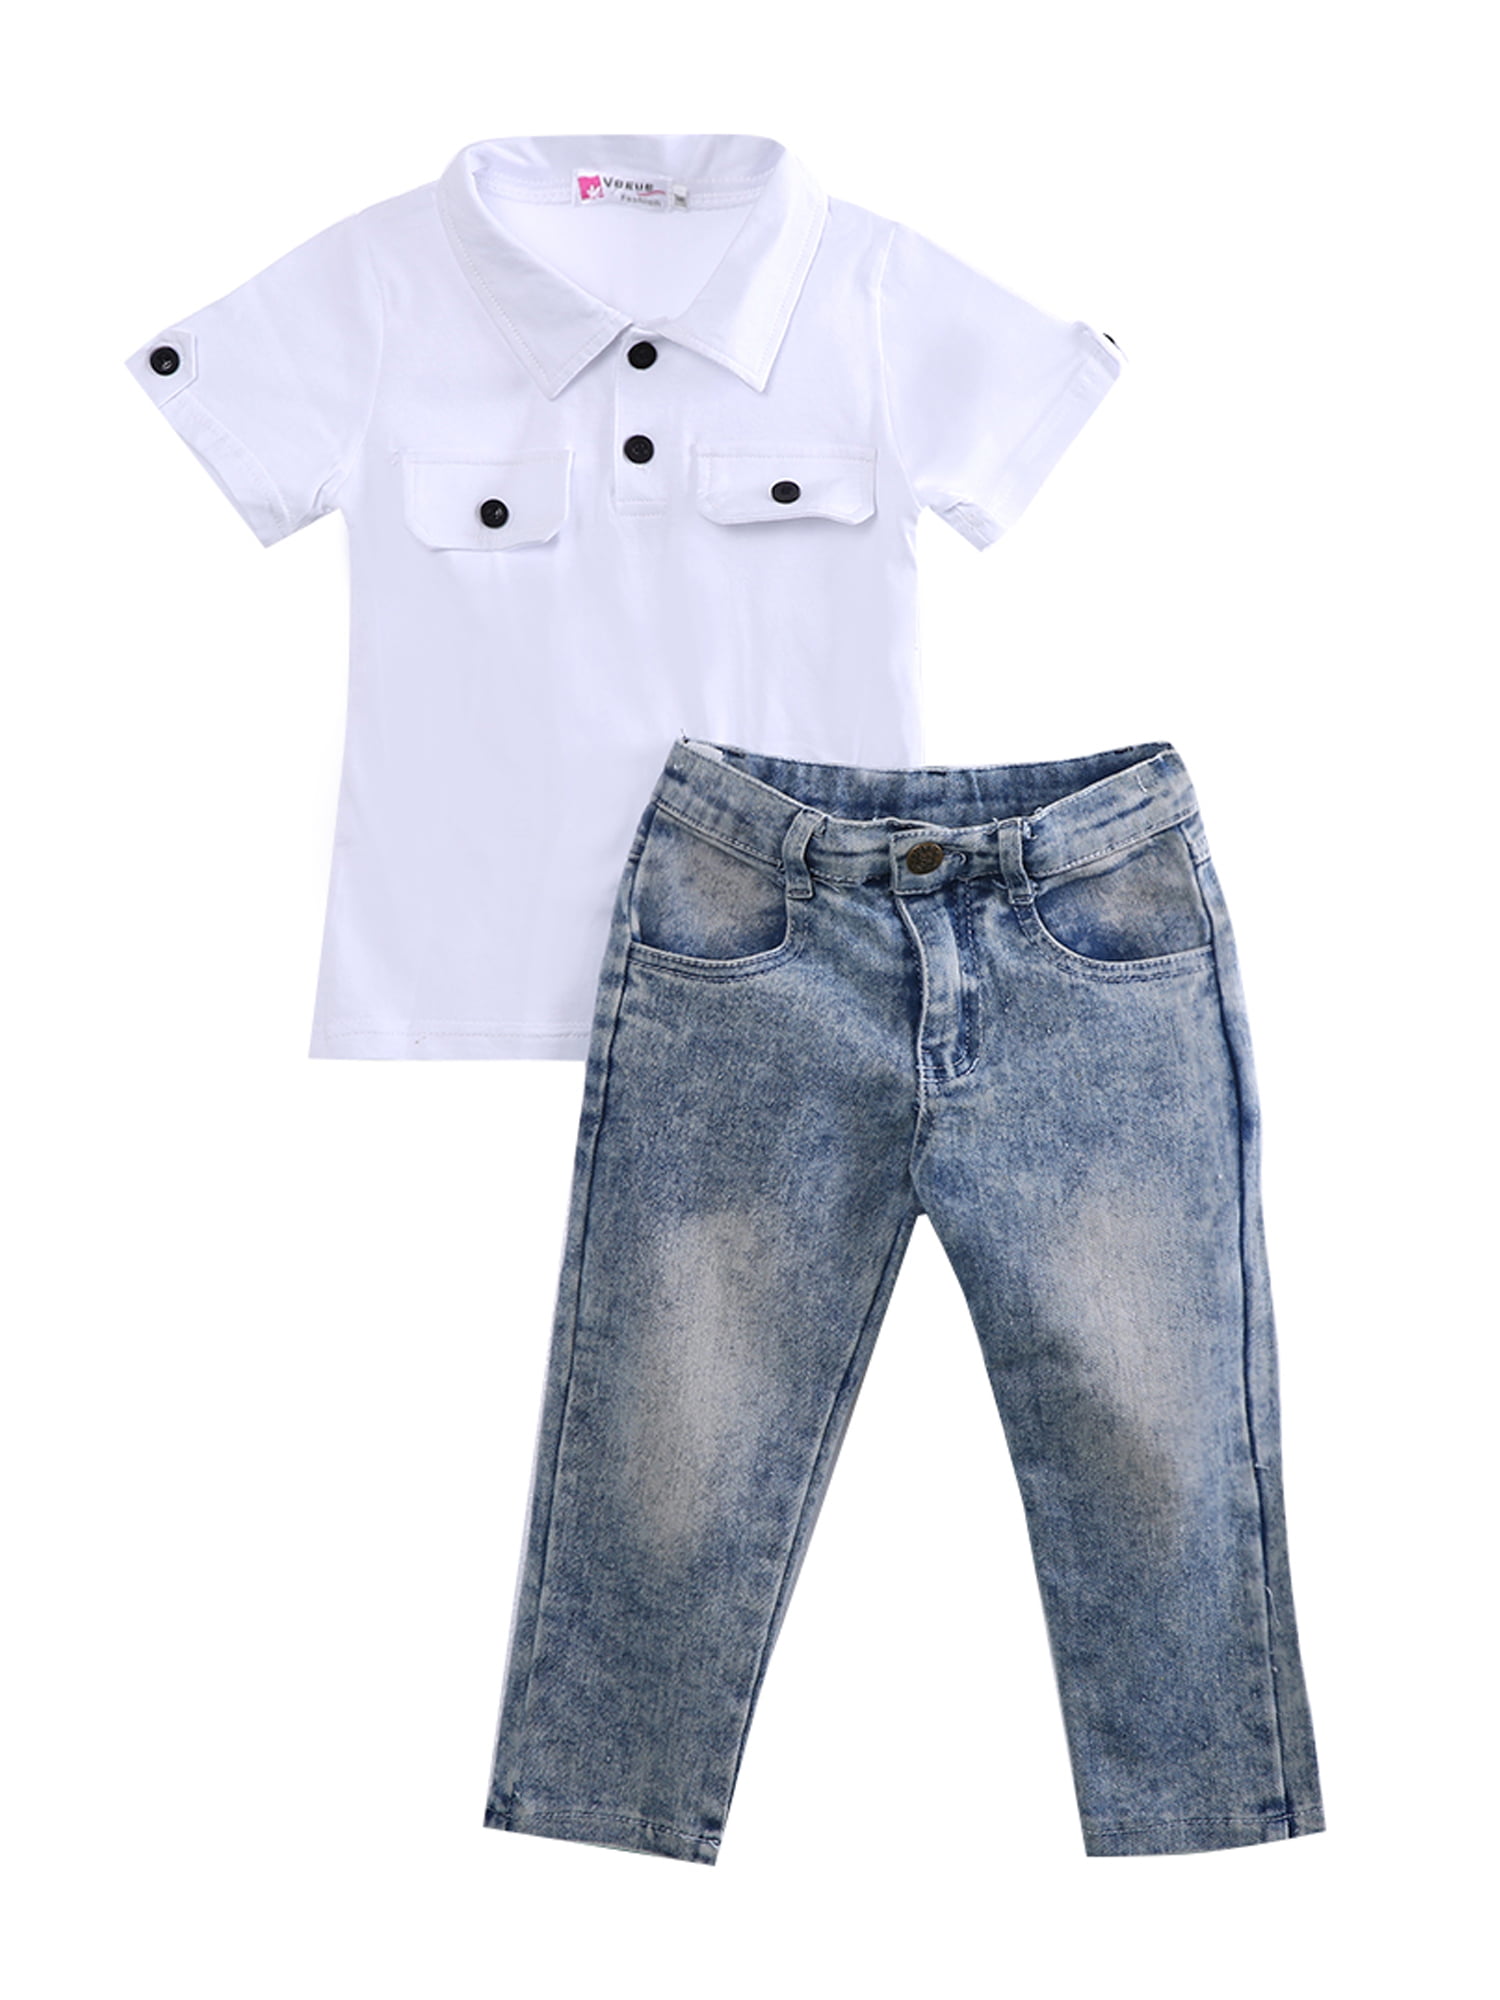 white jeans for baby boy